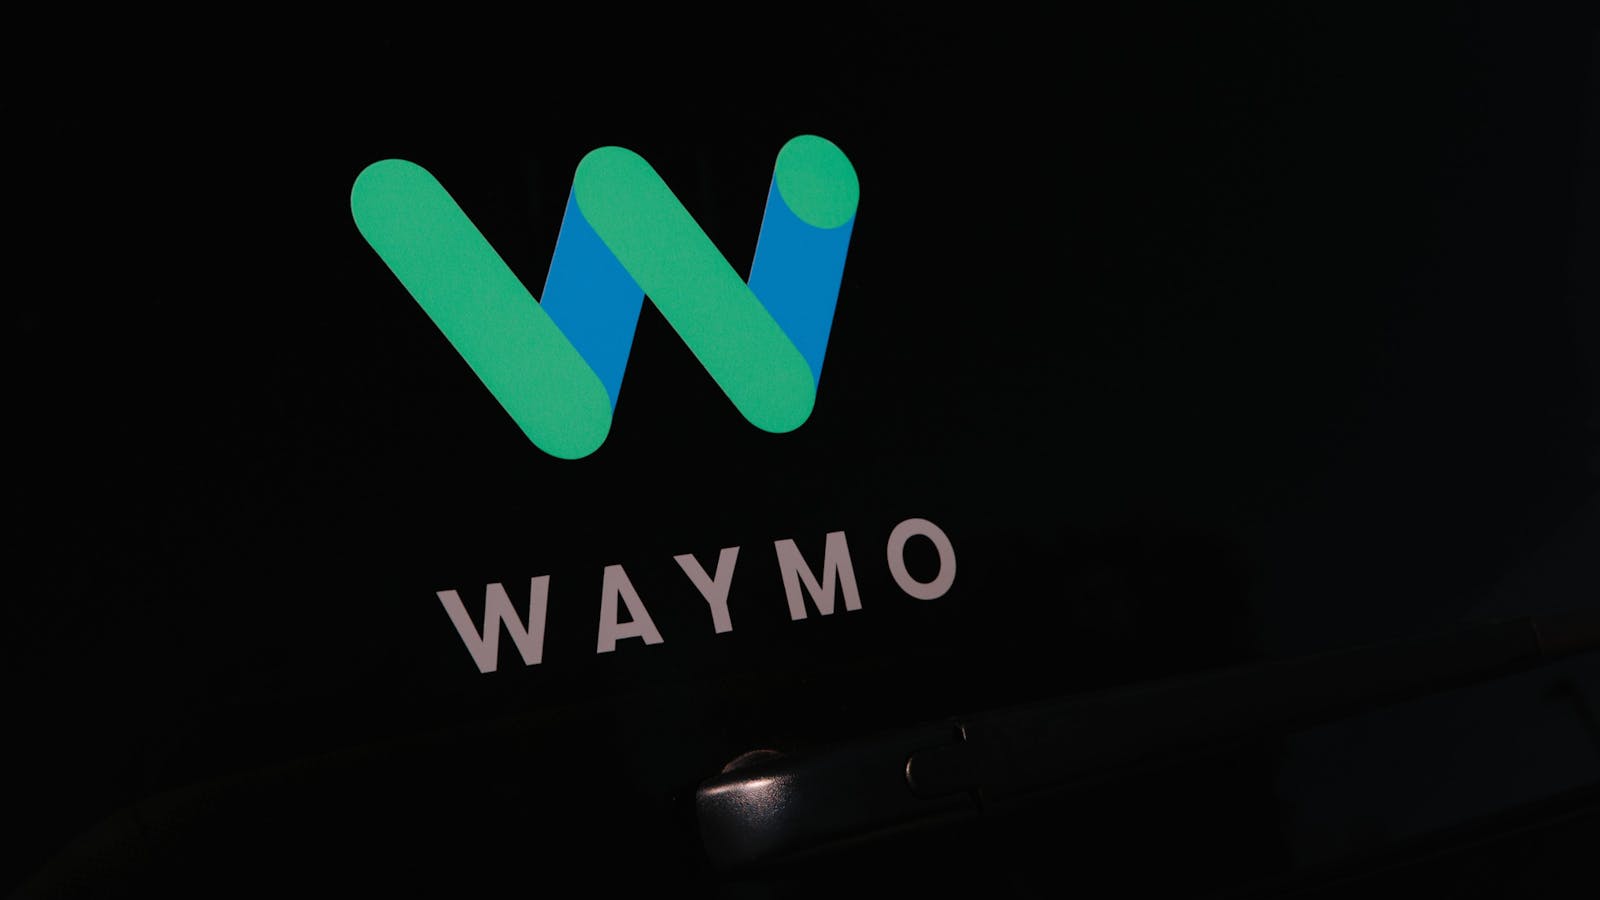 The back windshield of a Waymo Chrysler Pacifica robotaxi prototype. Photo by Bloomberg